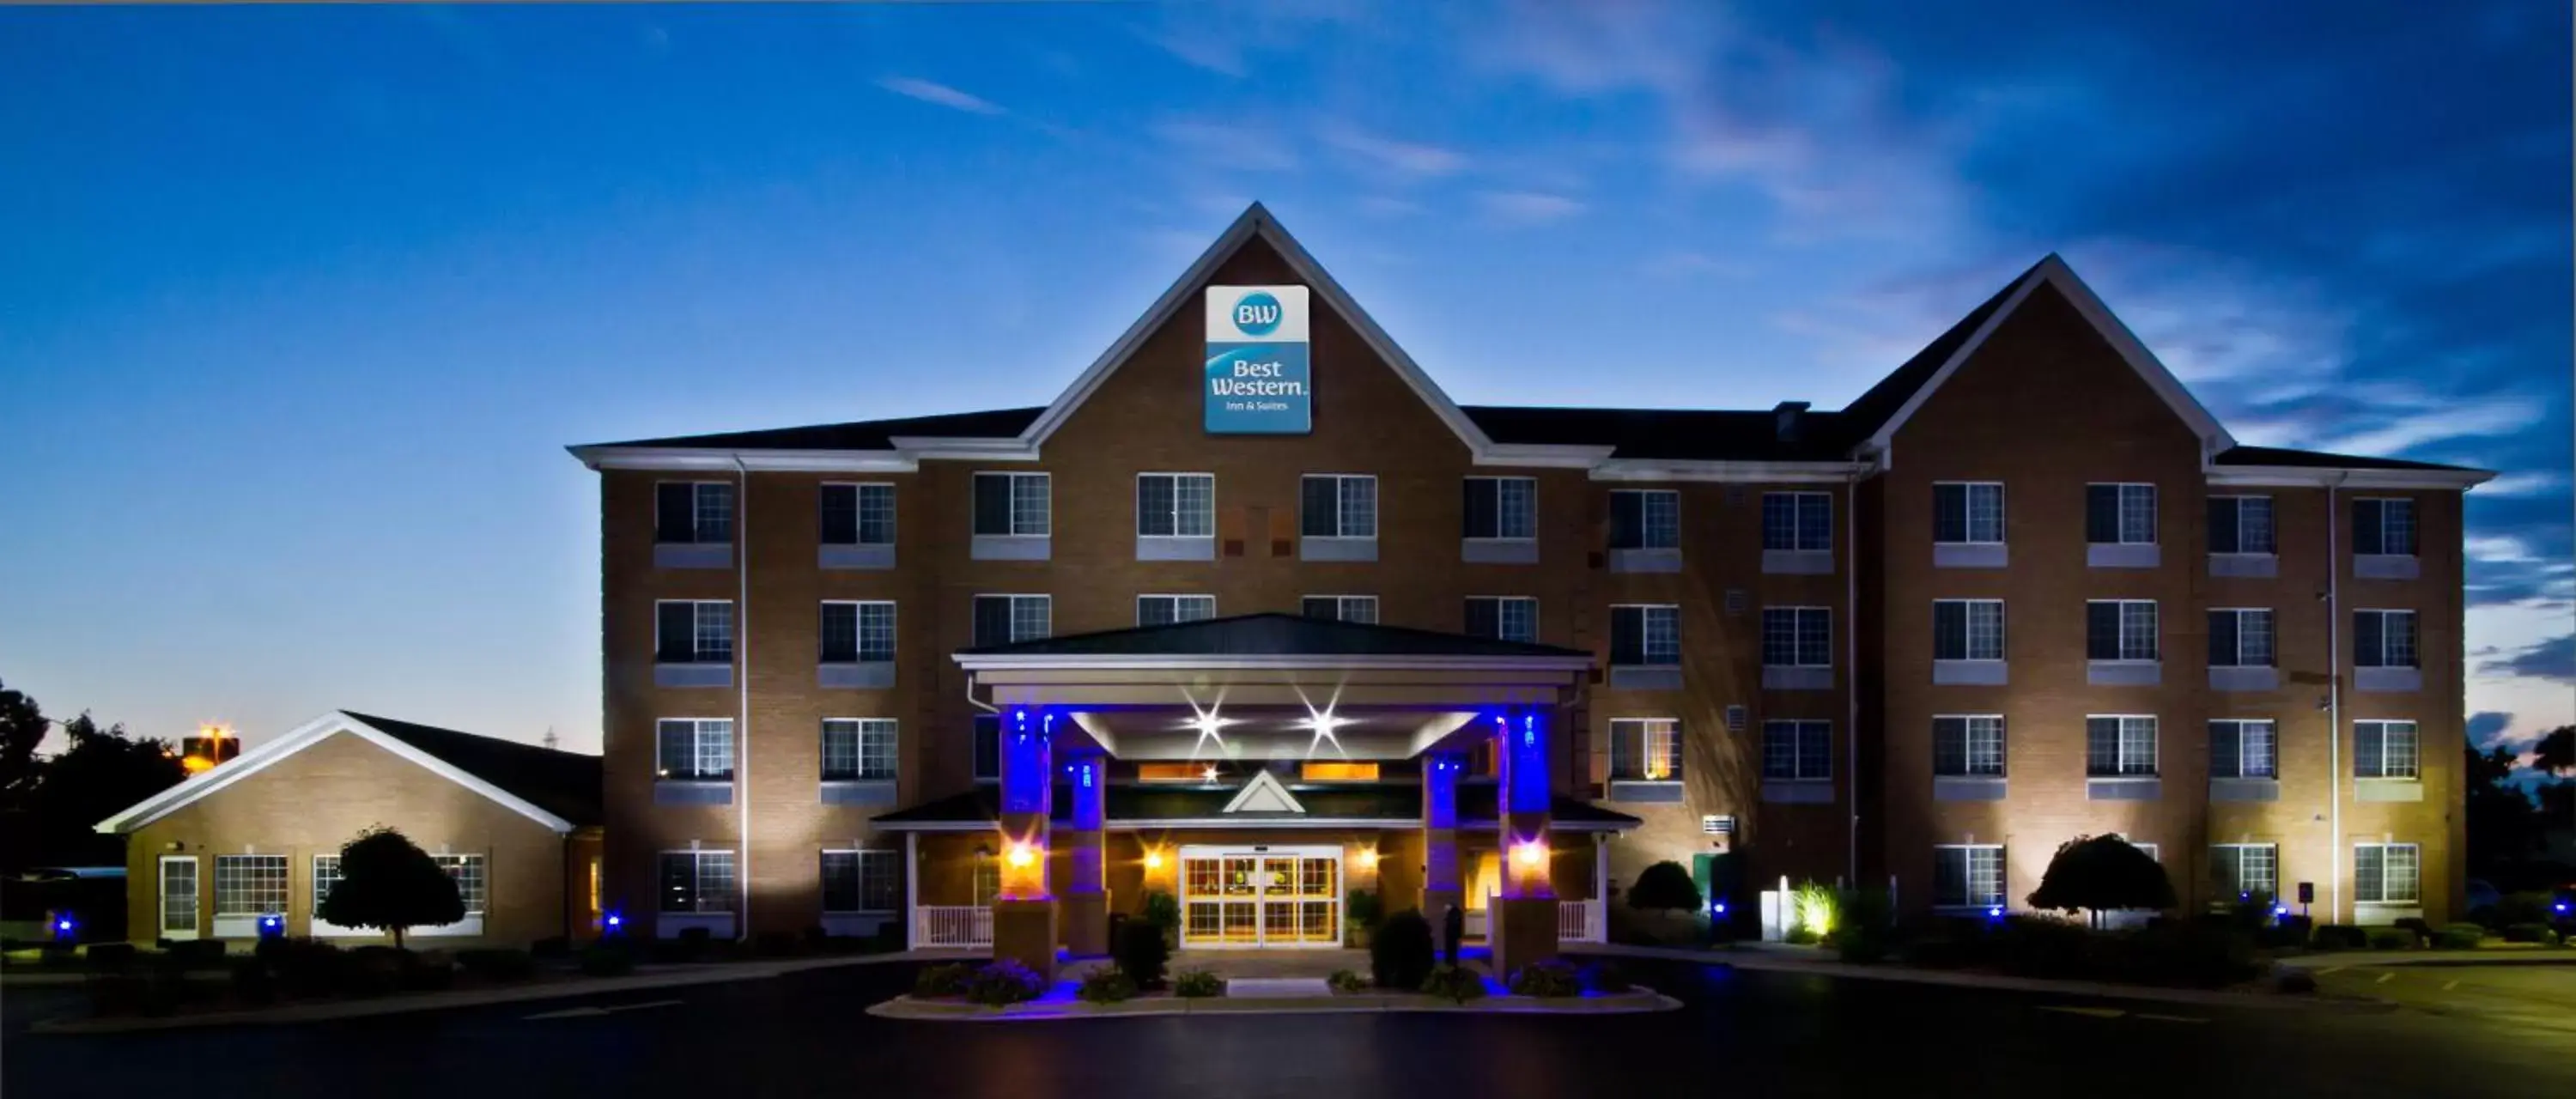 Facade/entrance, Property Building in Best Western Executive Inn & Suites